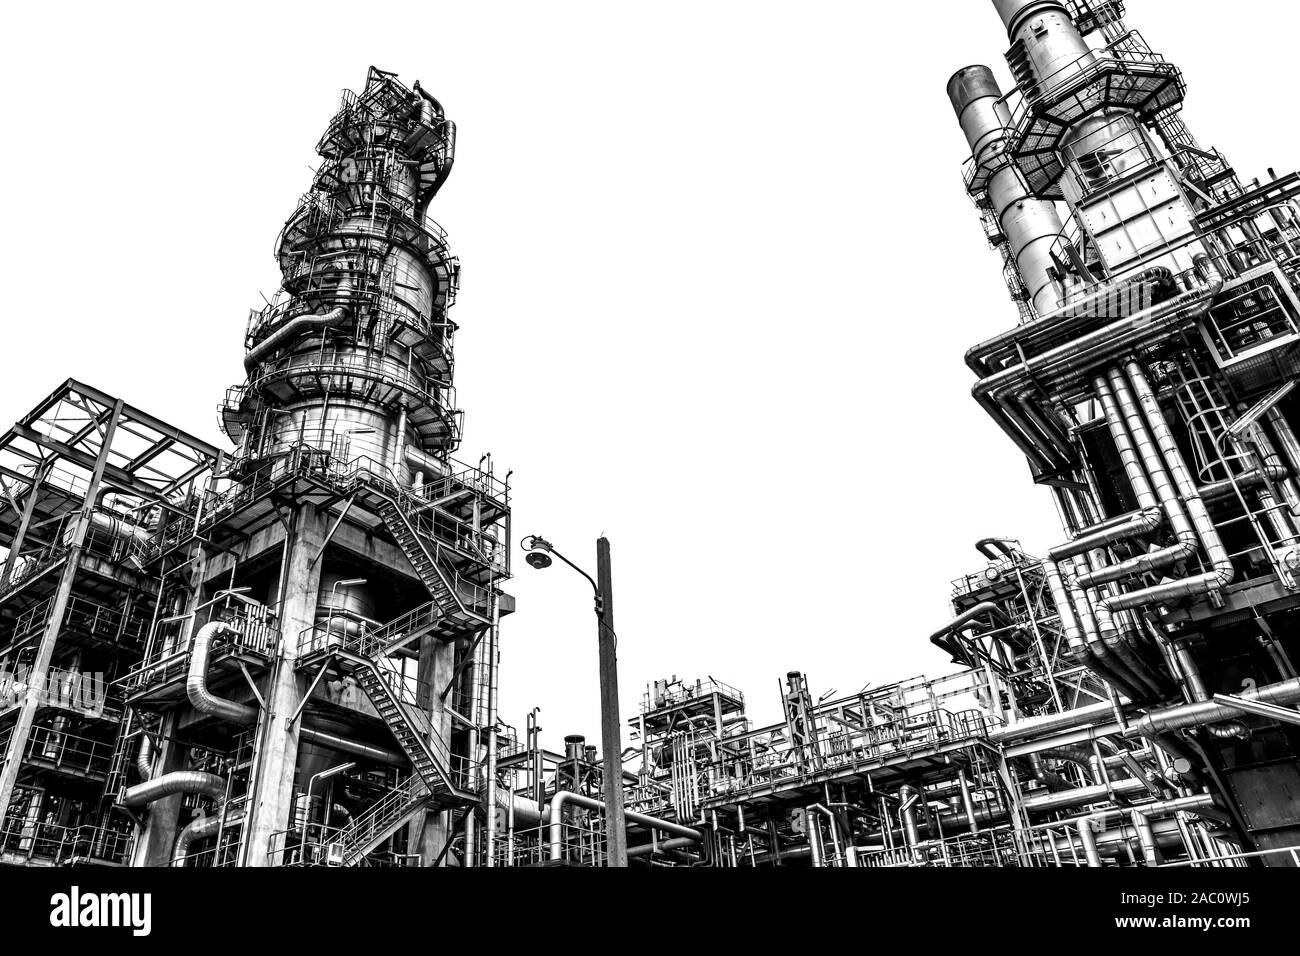 Oil and gas industry,refinery factory,petrochemical plant area at white background. Stock Photo